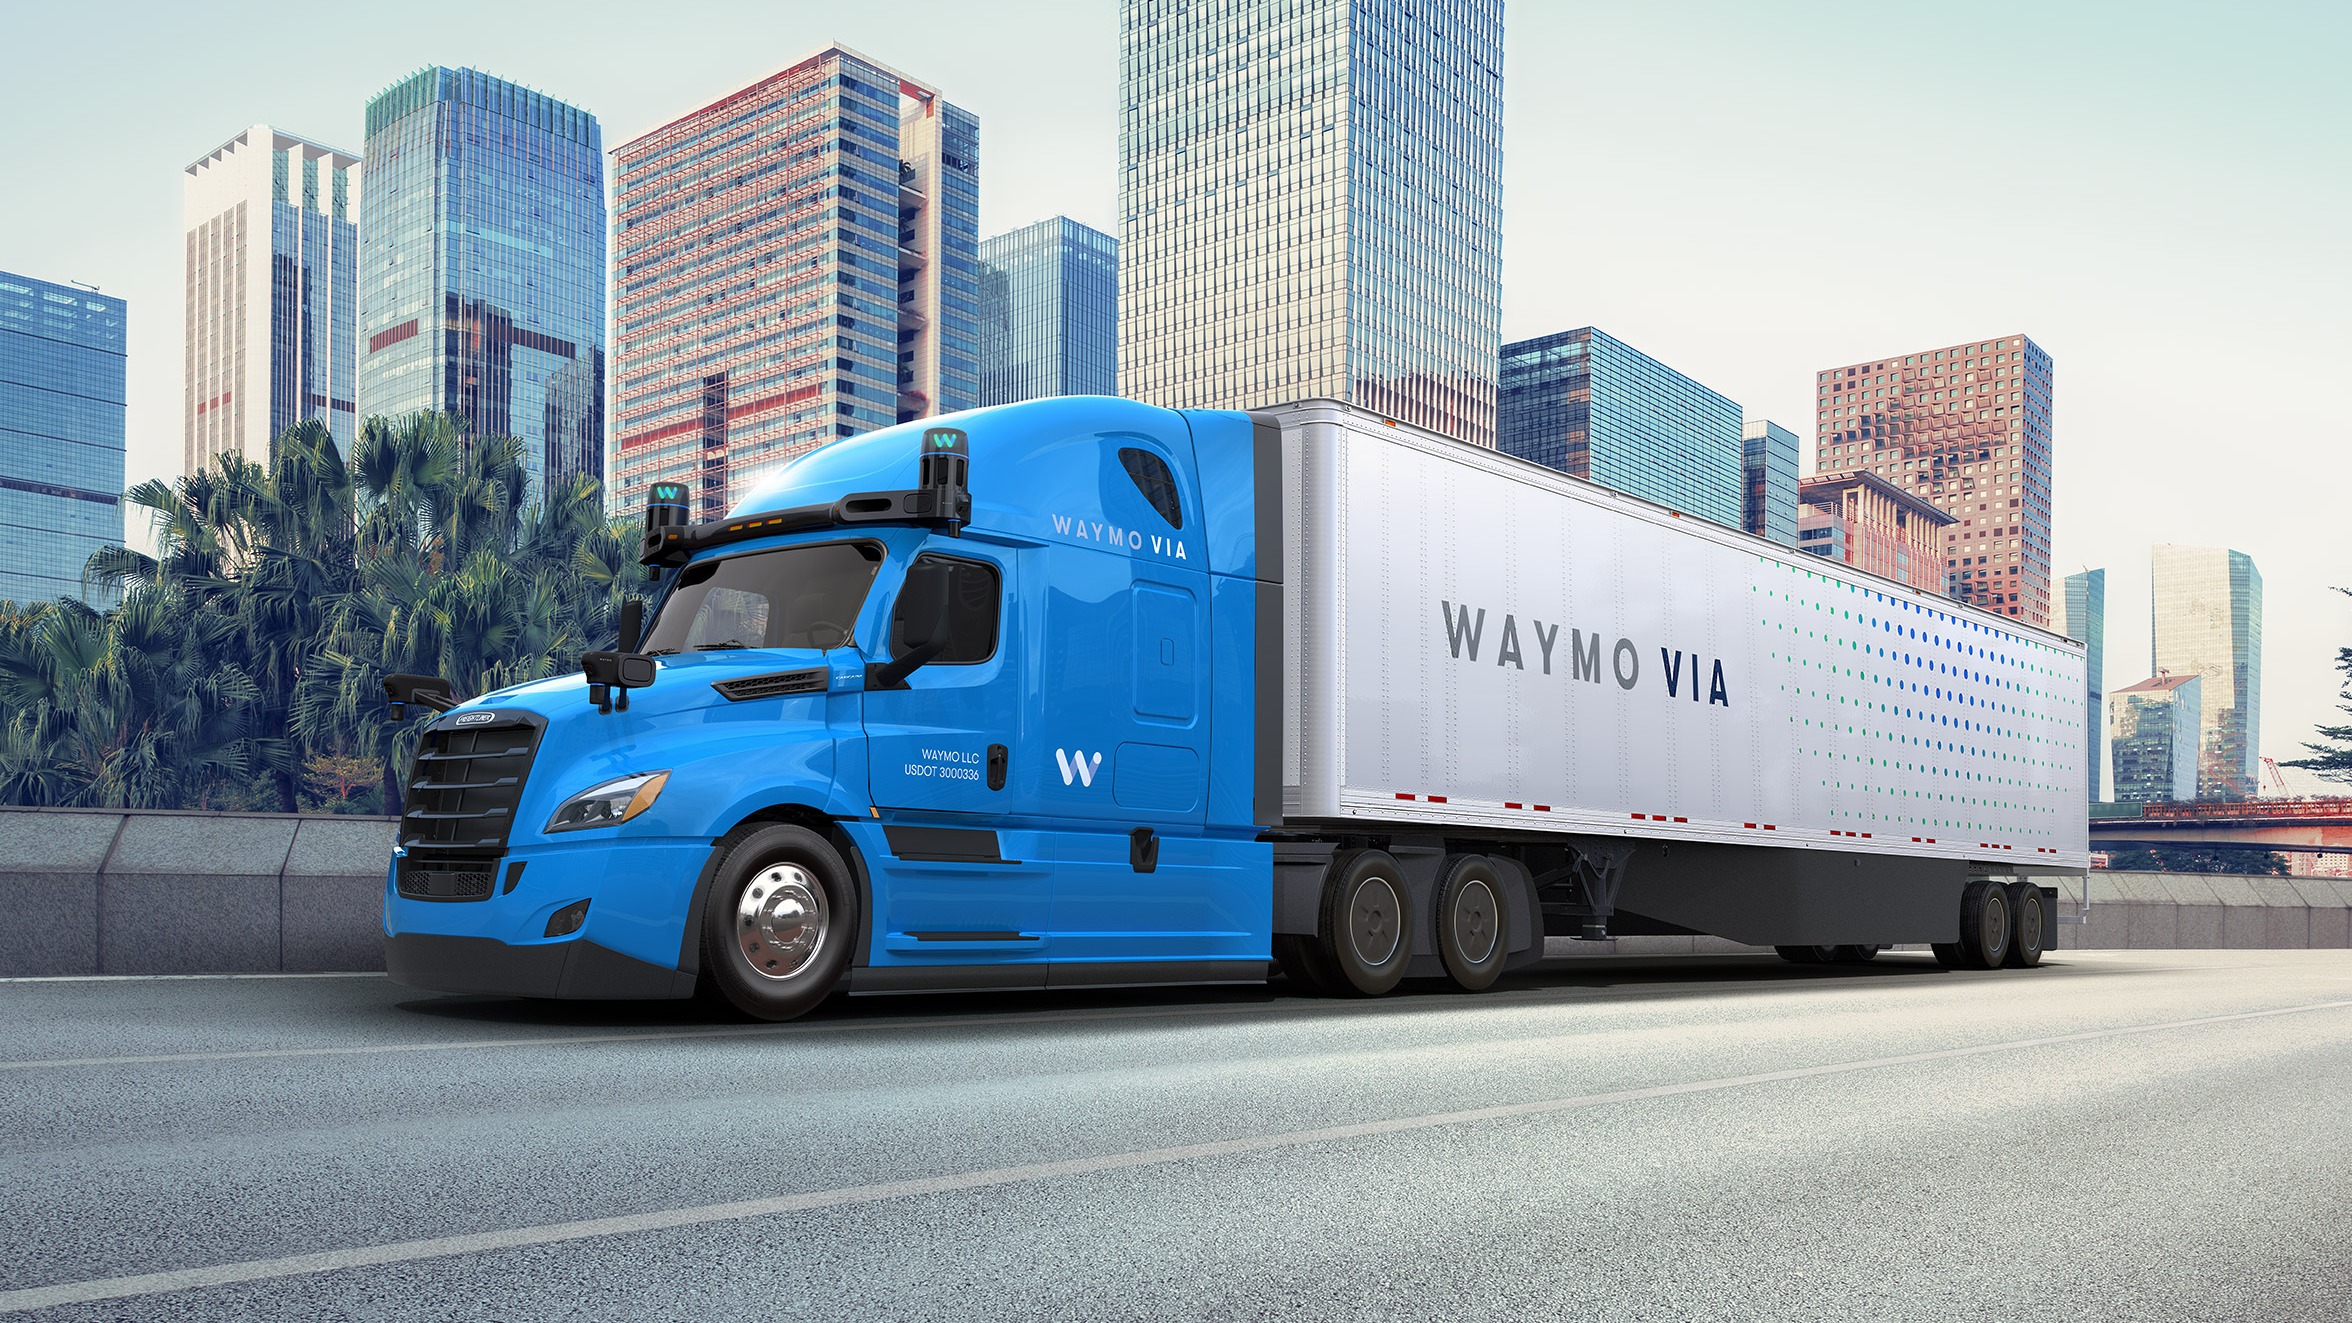 Autonomous Truck Driving: Is it a Solution to the Truck Driver Shortage and Supply Chain Issues?